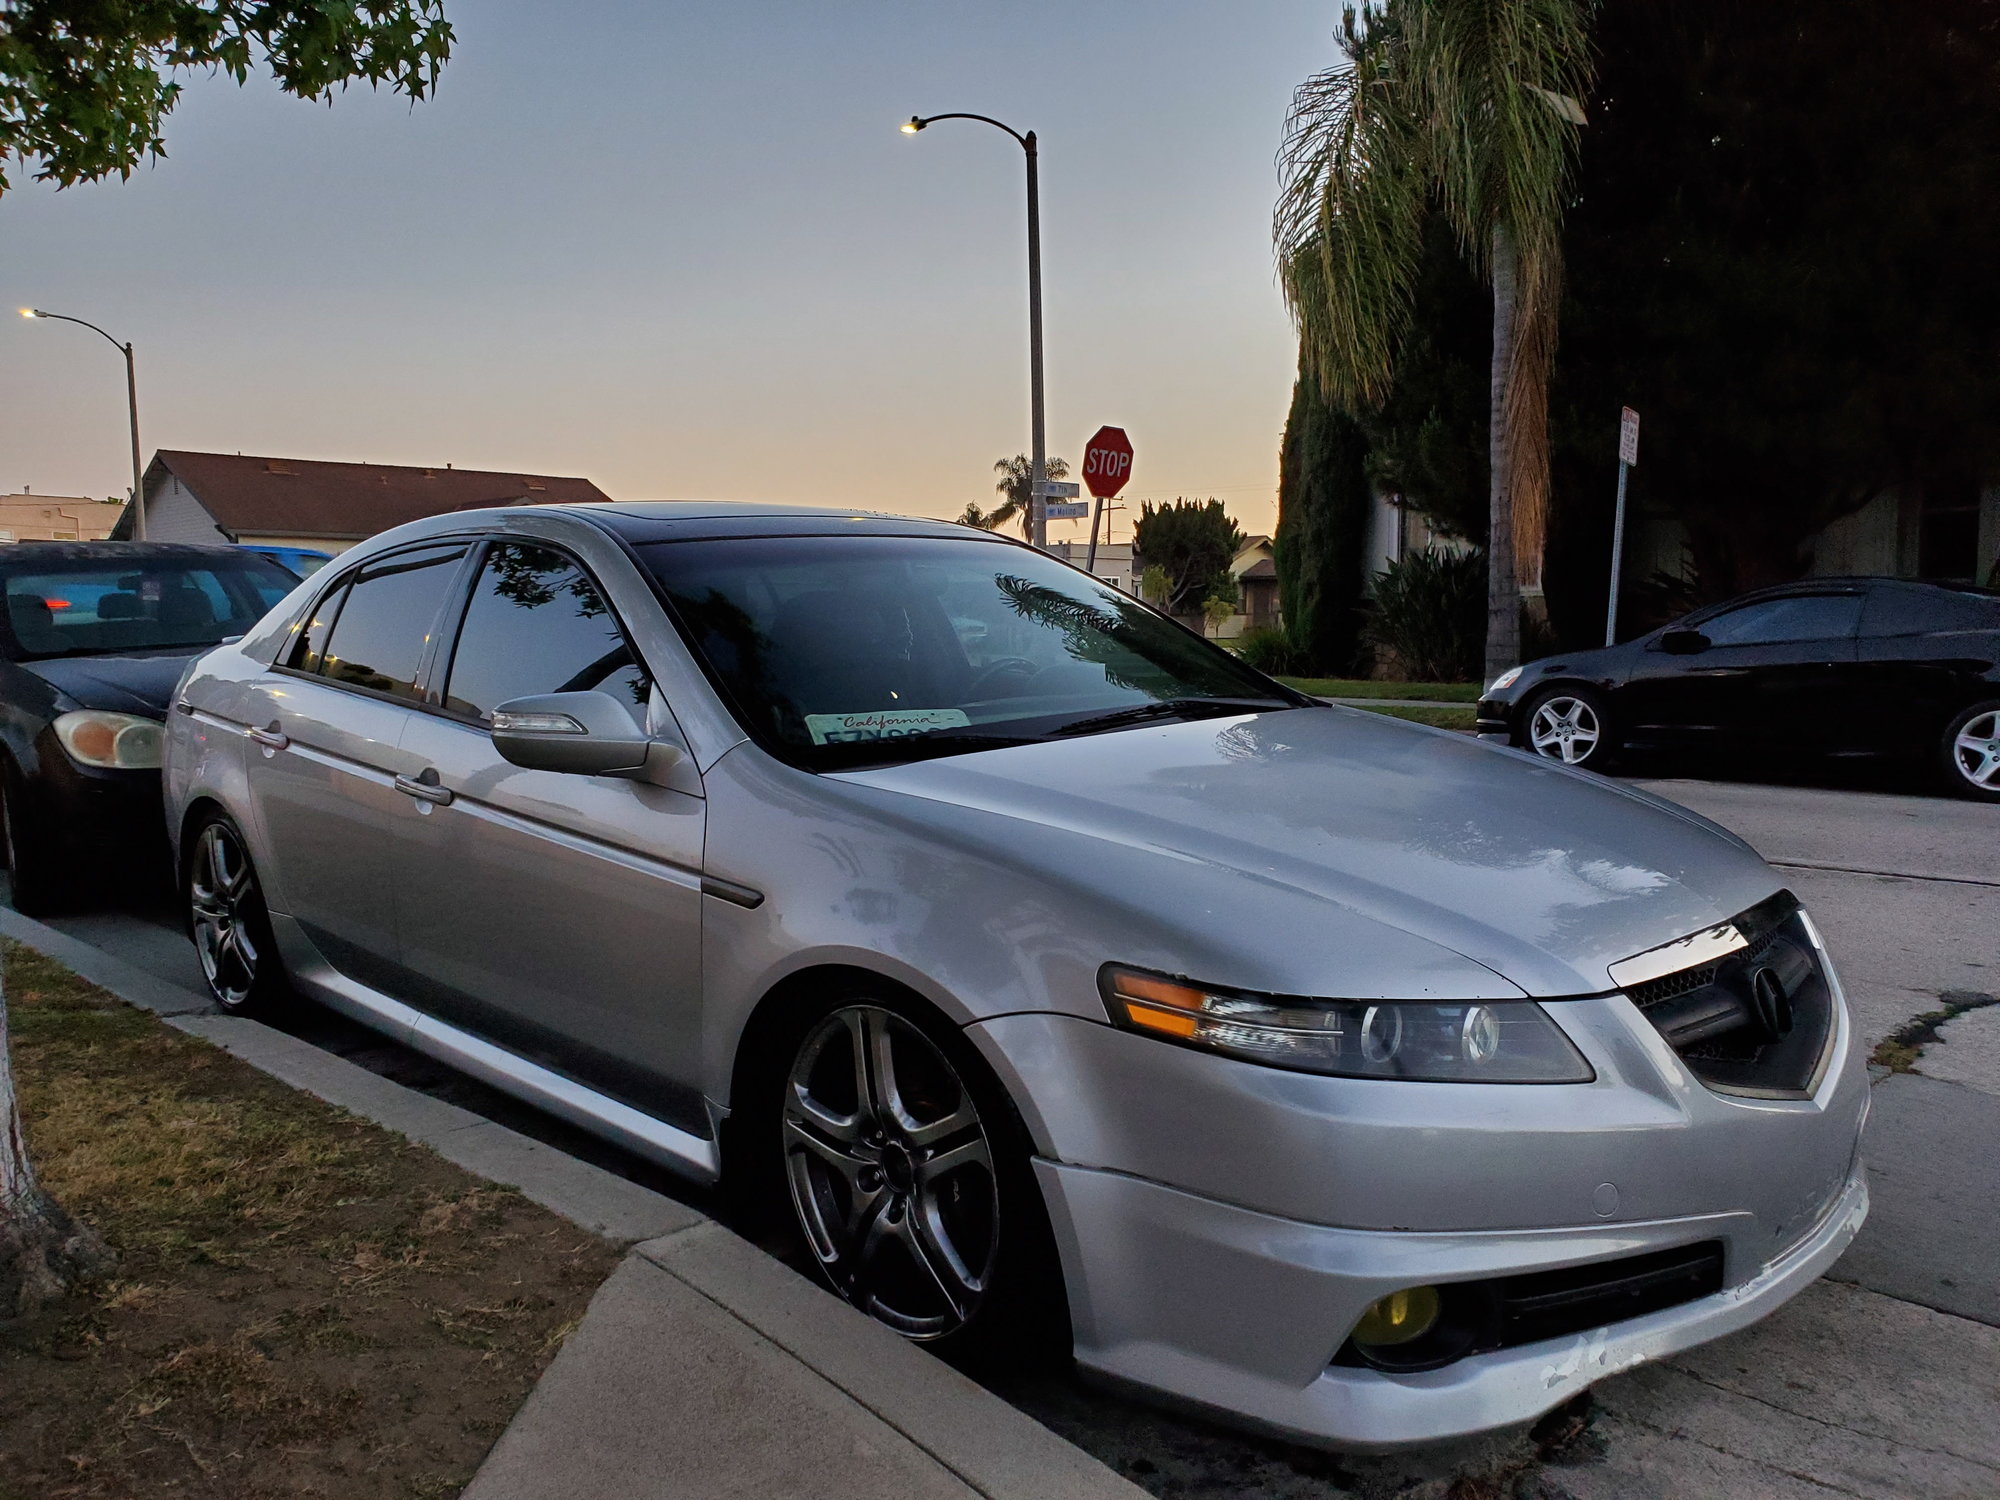 2007 Acura TL - CLOSED: 2007 Acura TL Type S - 6 speed manual, CLEAN TITLE, 174k miles, silver - Used - VIN 19UUA75687A036478 - 174,000 Miles - 6 cyl - 2WD - Manual - Sedan - Silver - Long Beach, CA 90804, United States